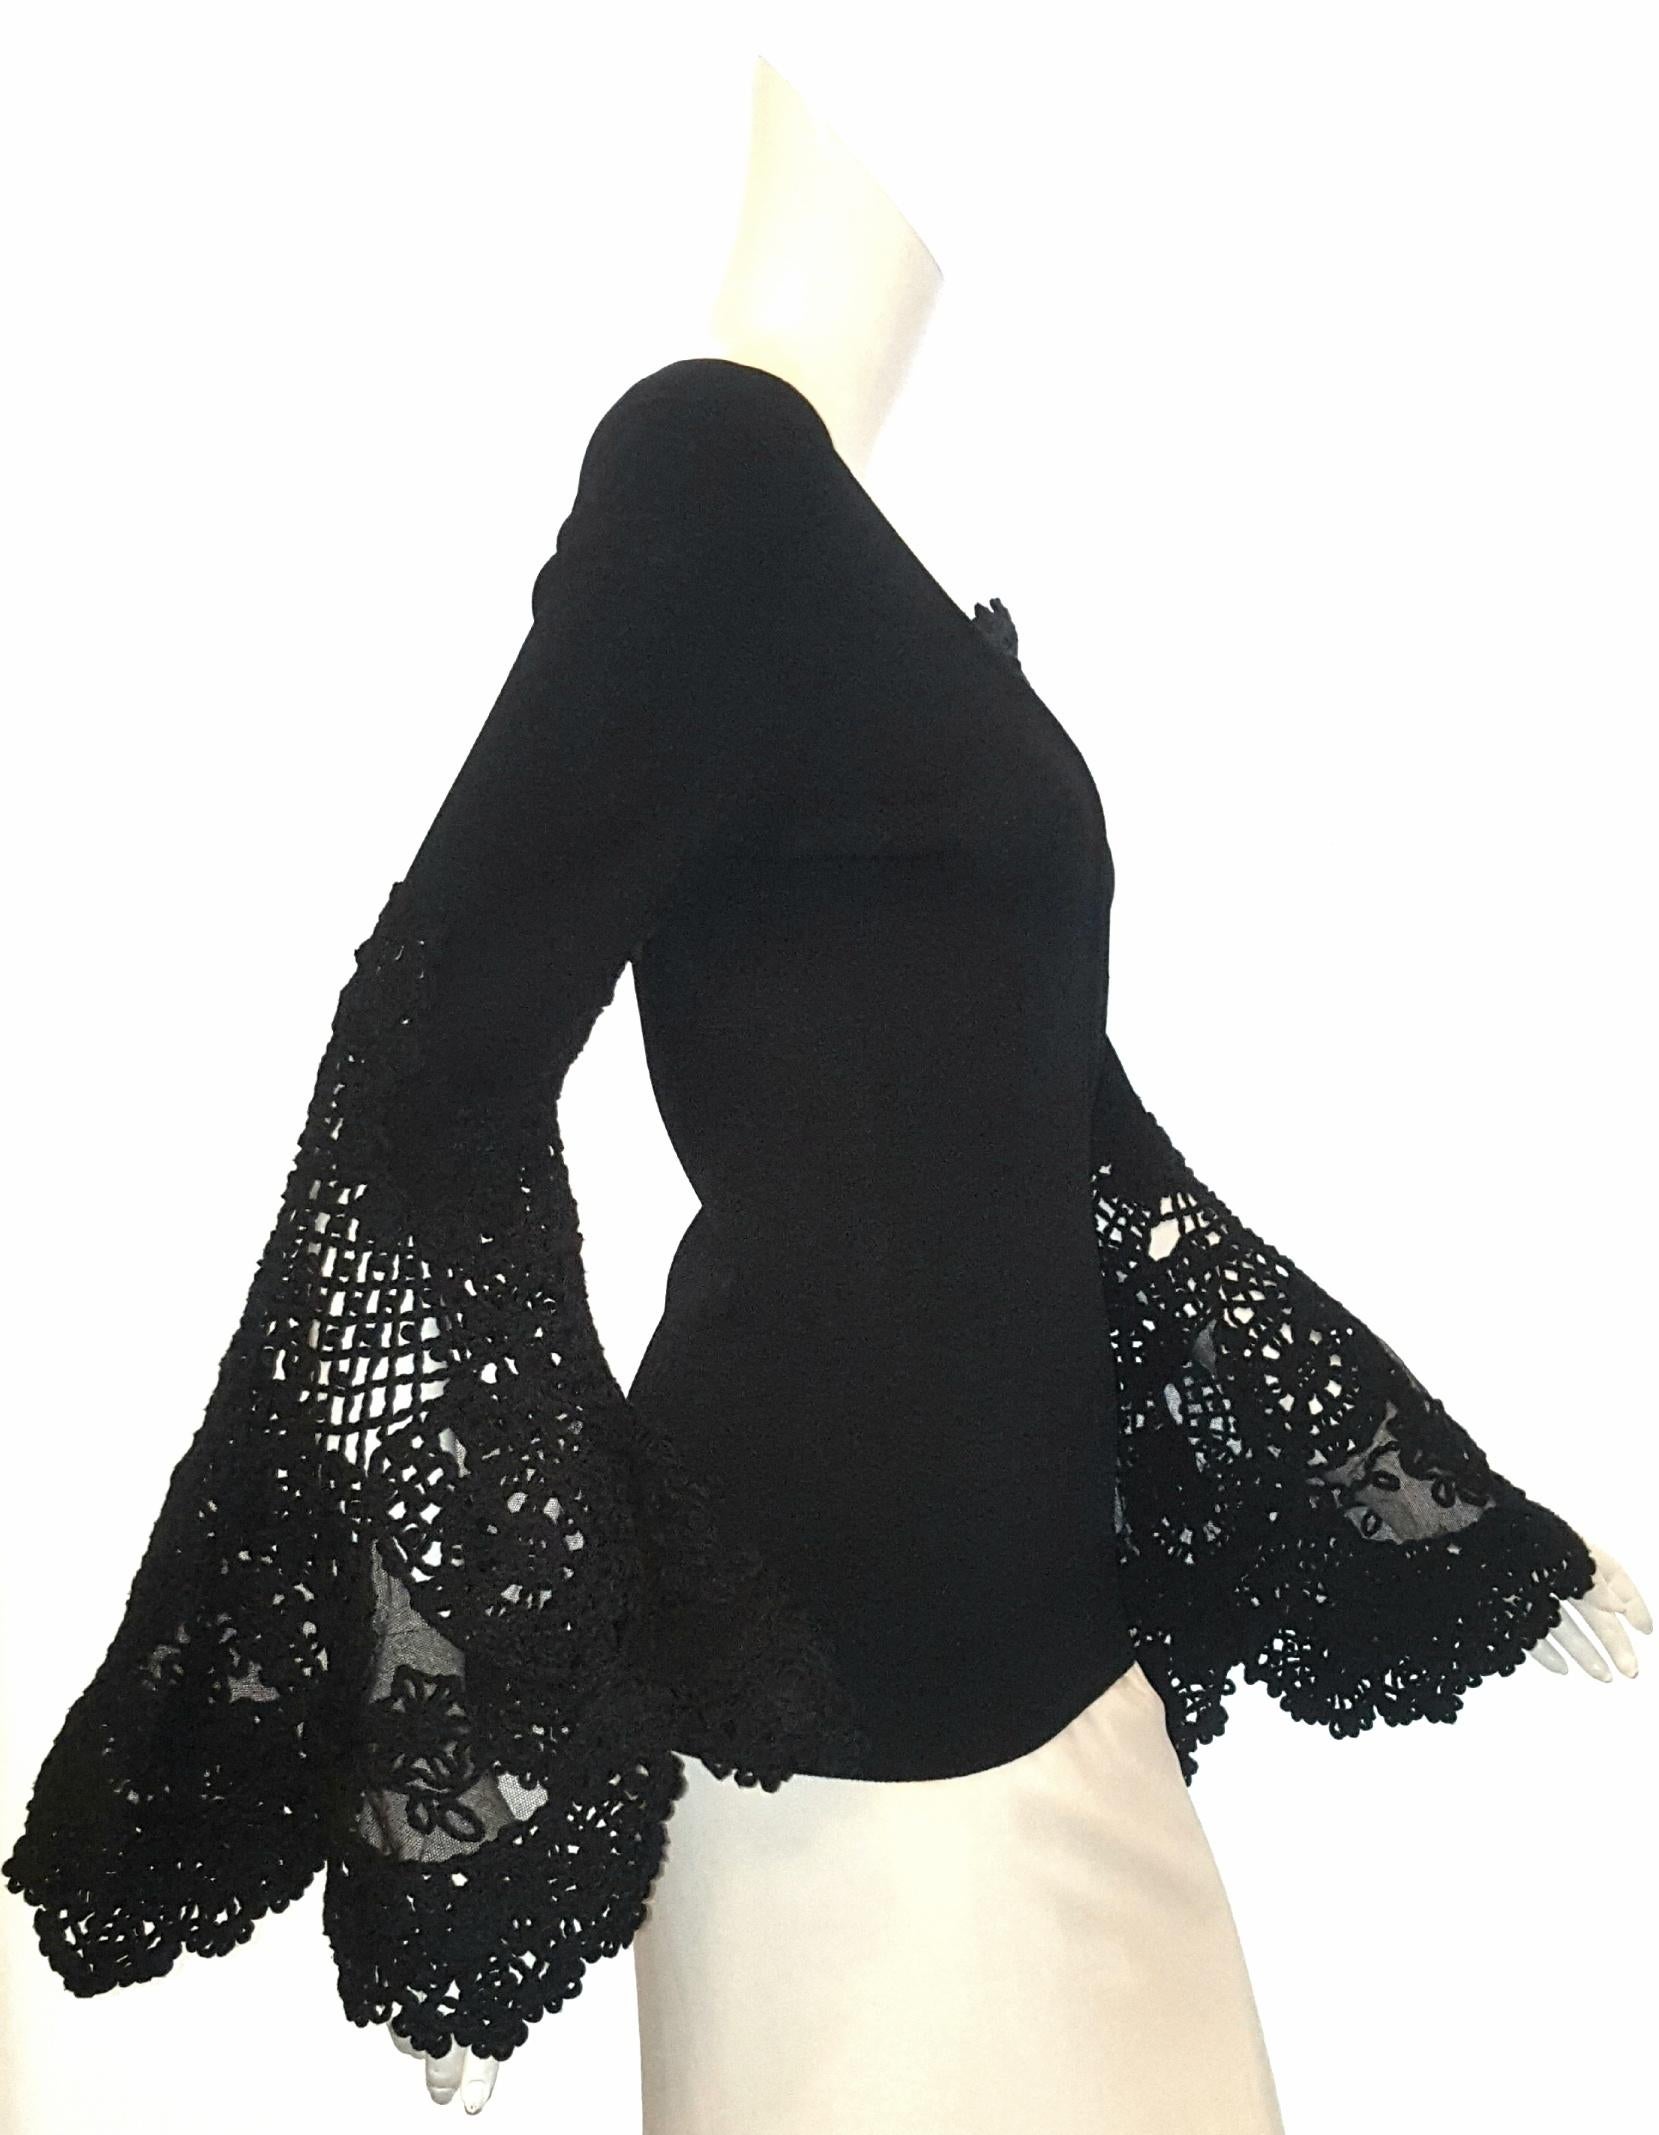 Chanel black crocheted  and embroidered flared sleeve top is a staple piece and features a V neck with crochet insert, at the neckline. The long sleeves flared out to an extreme bell cuff crocheted in a lace  motif.    With a fitted waist and close